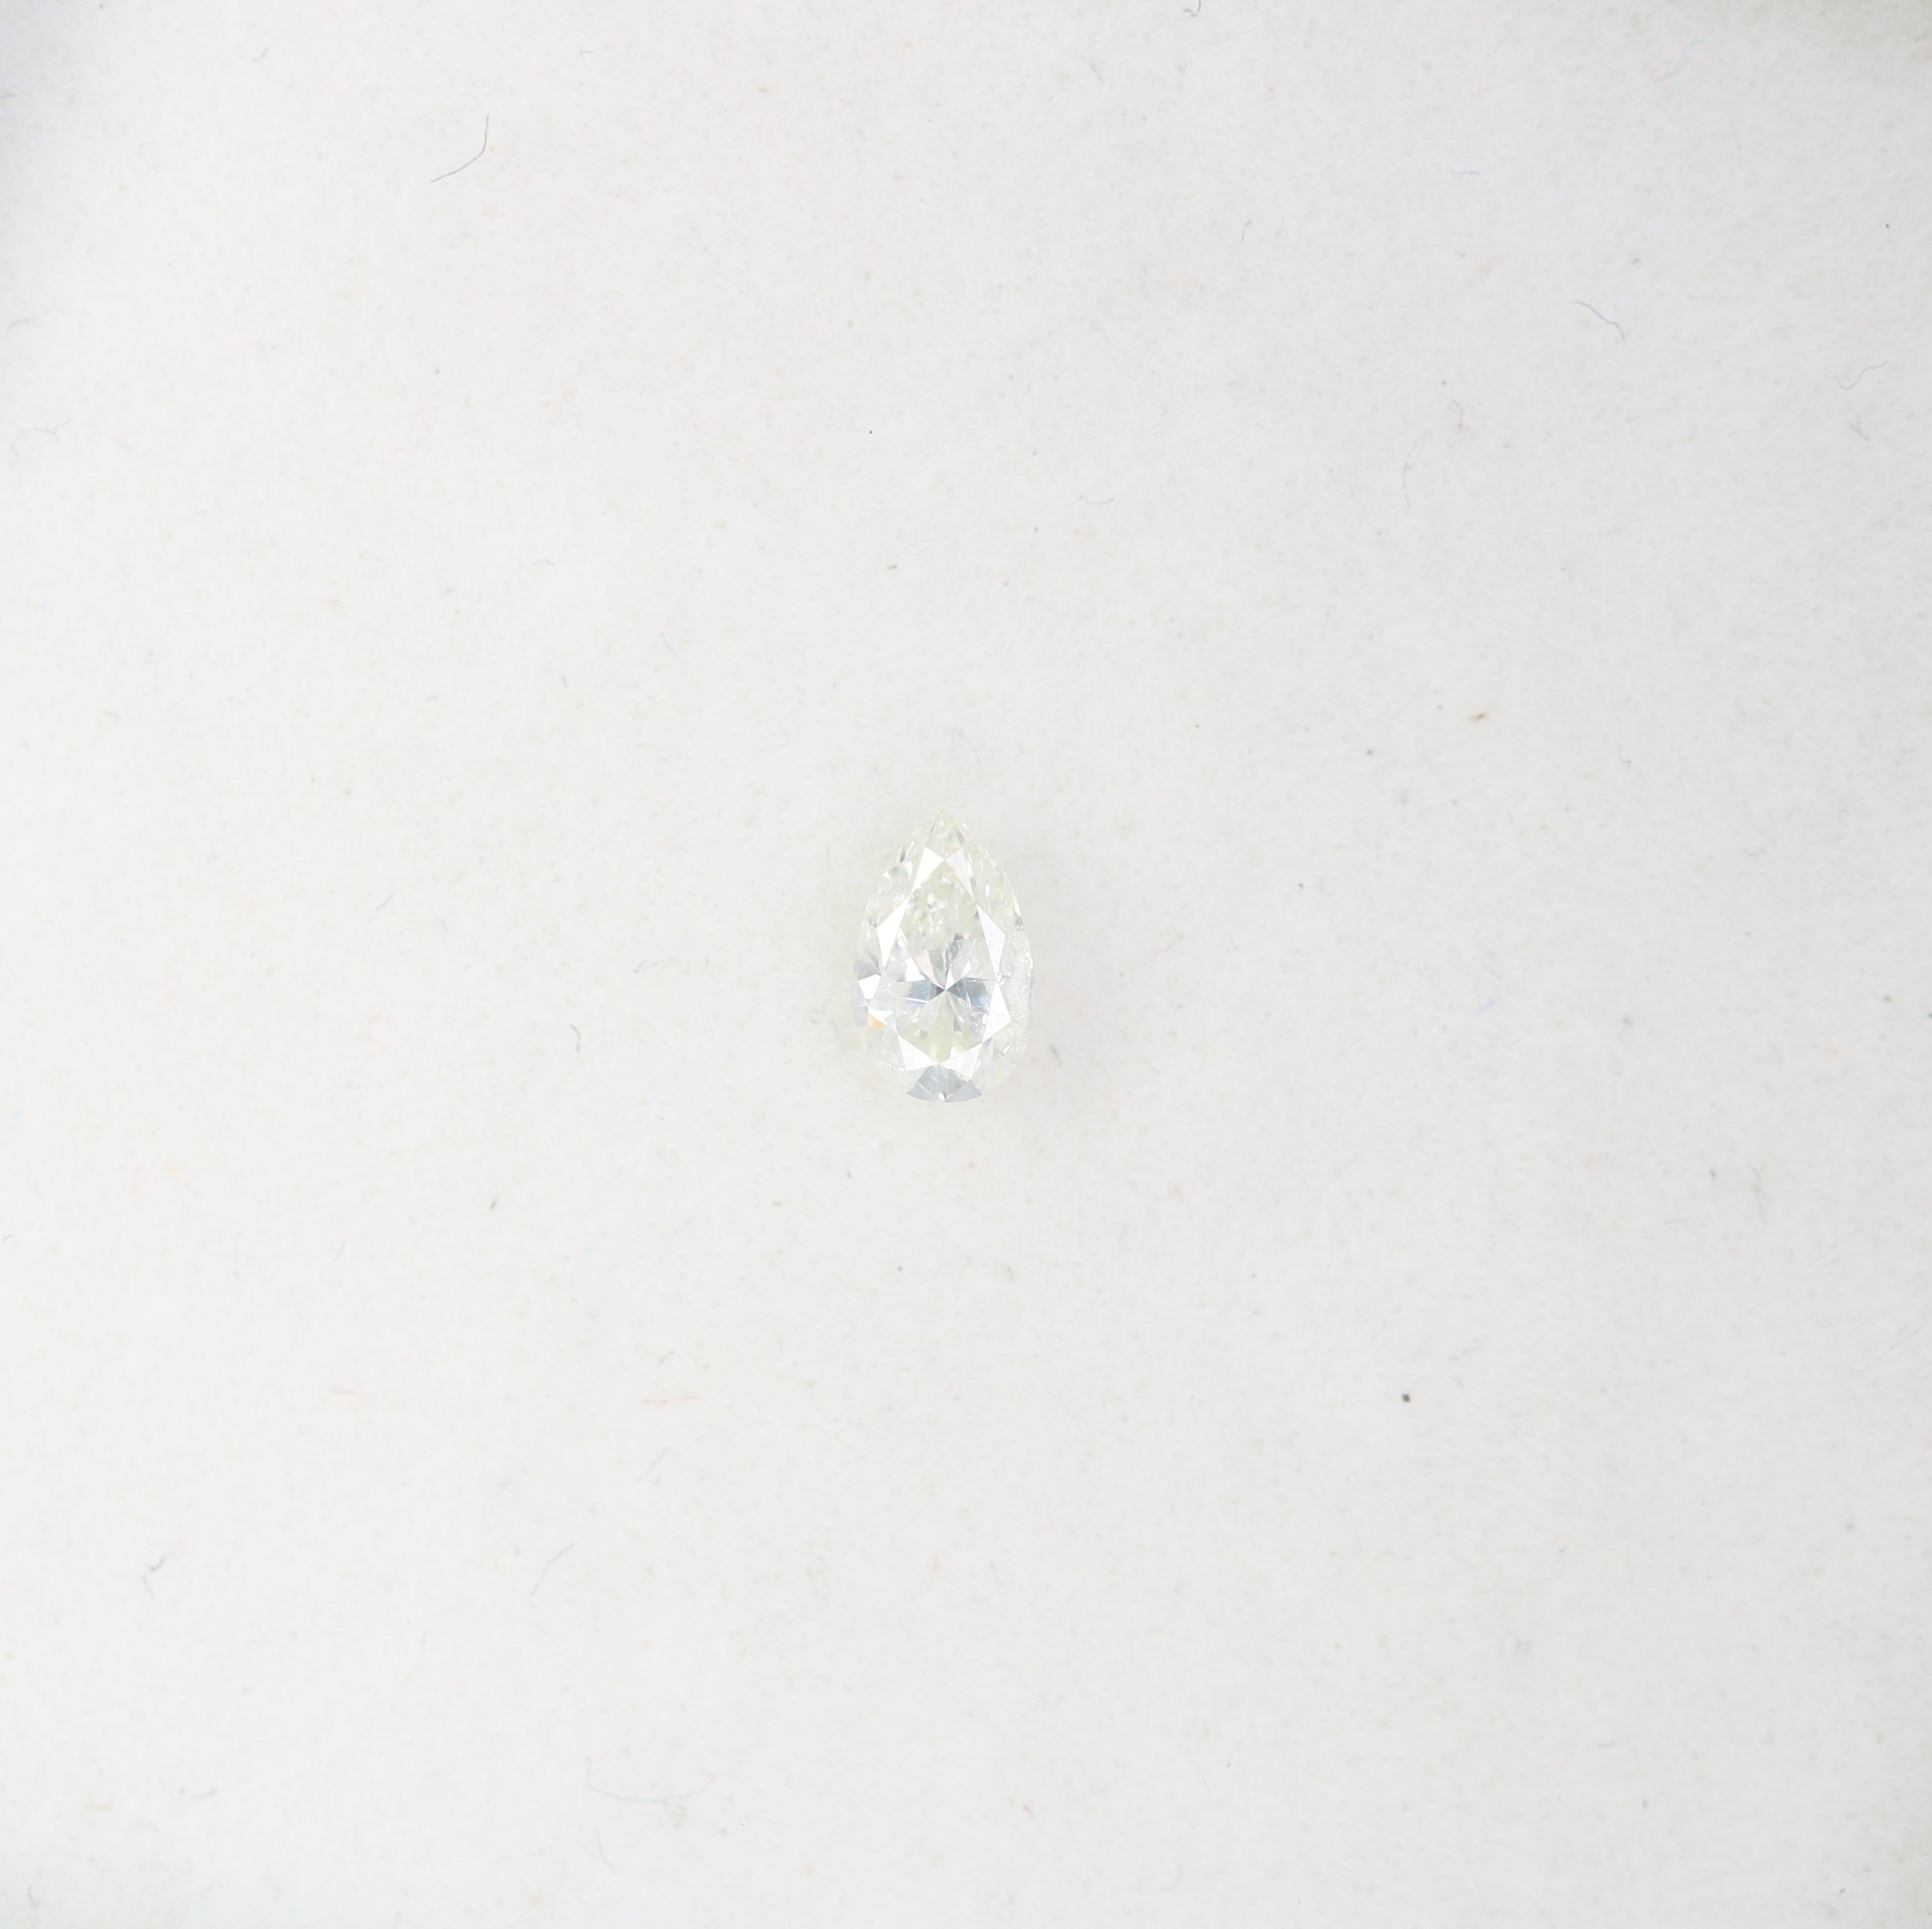 0.19 CT Natural White Pear Cut Diamond For Engagement Ring